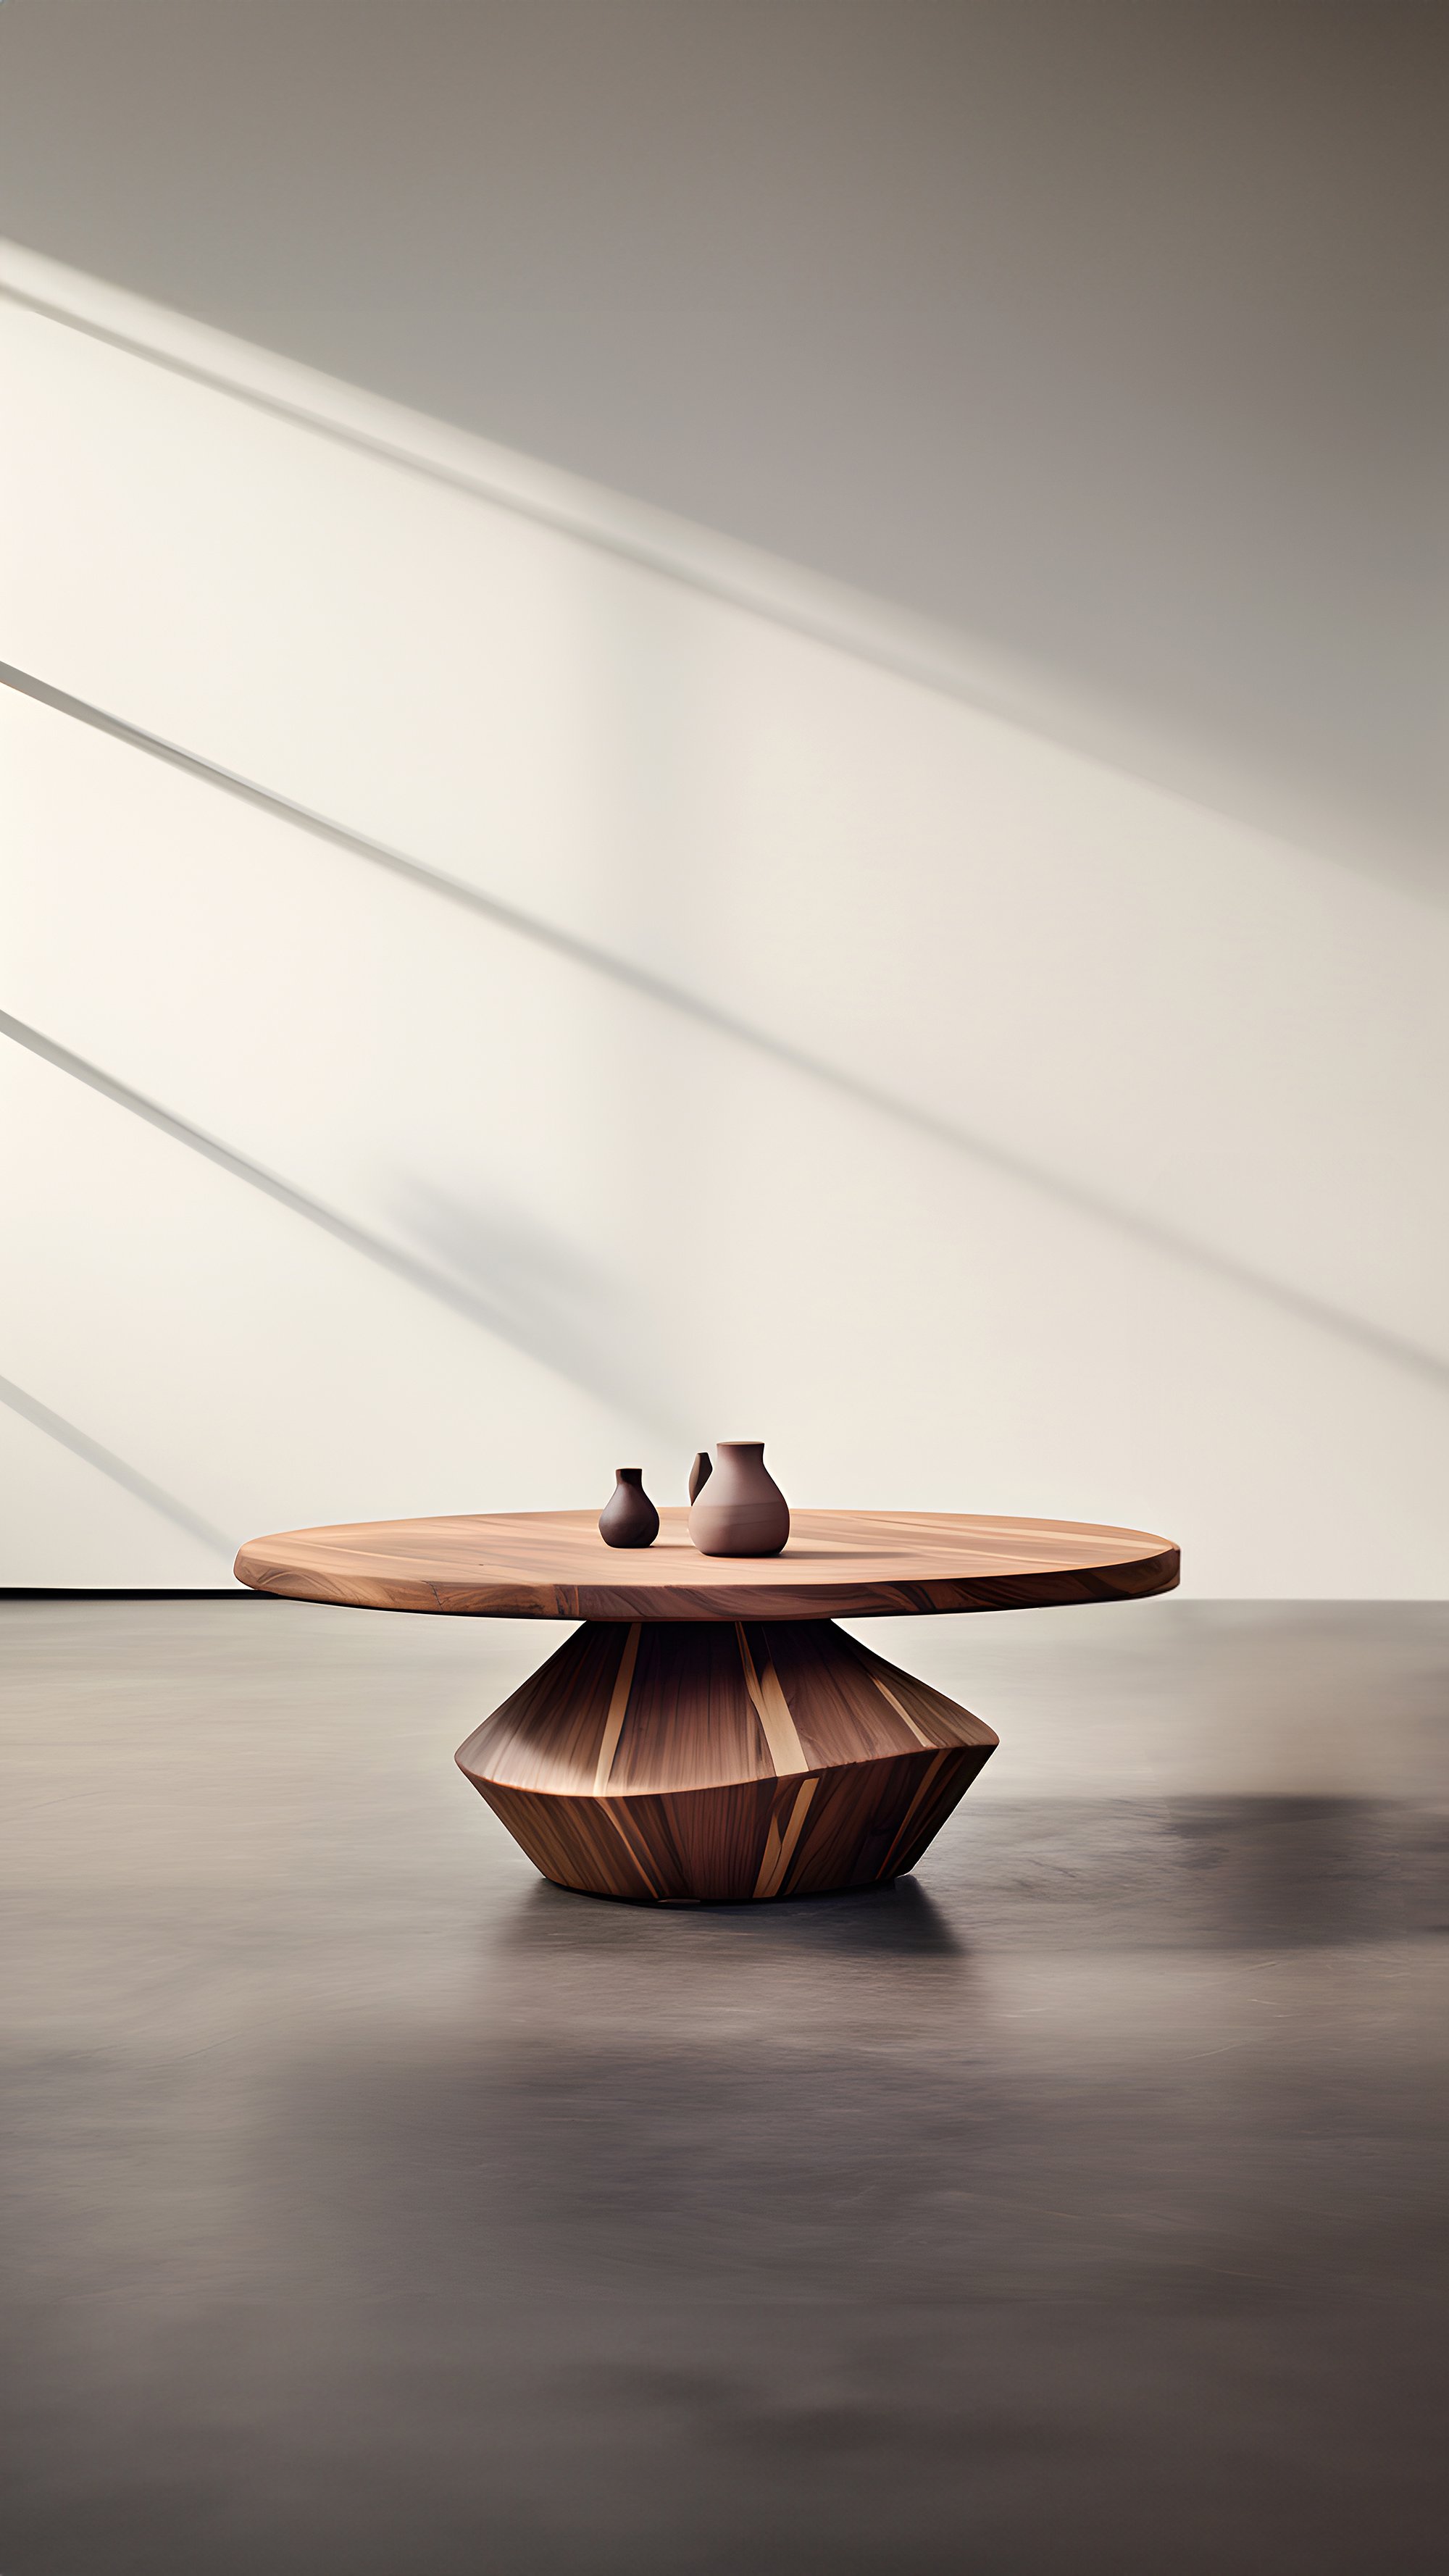 Sculptural Coffee Table Made of Solid Wood, Center Table Solace S43 by Joel Escalona — 7.jpg